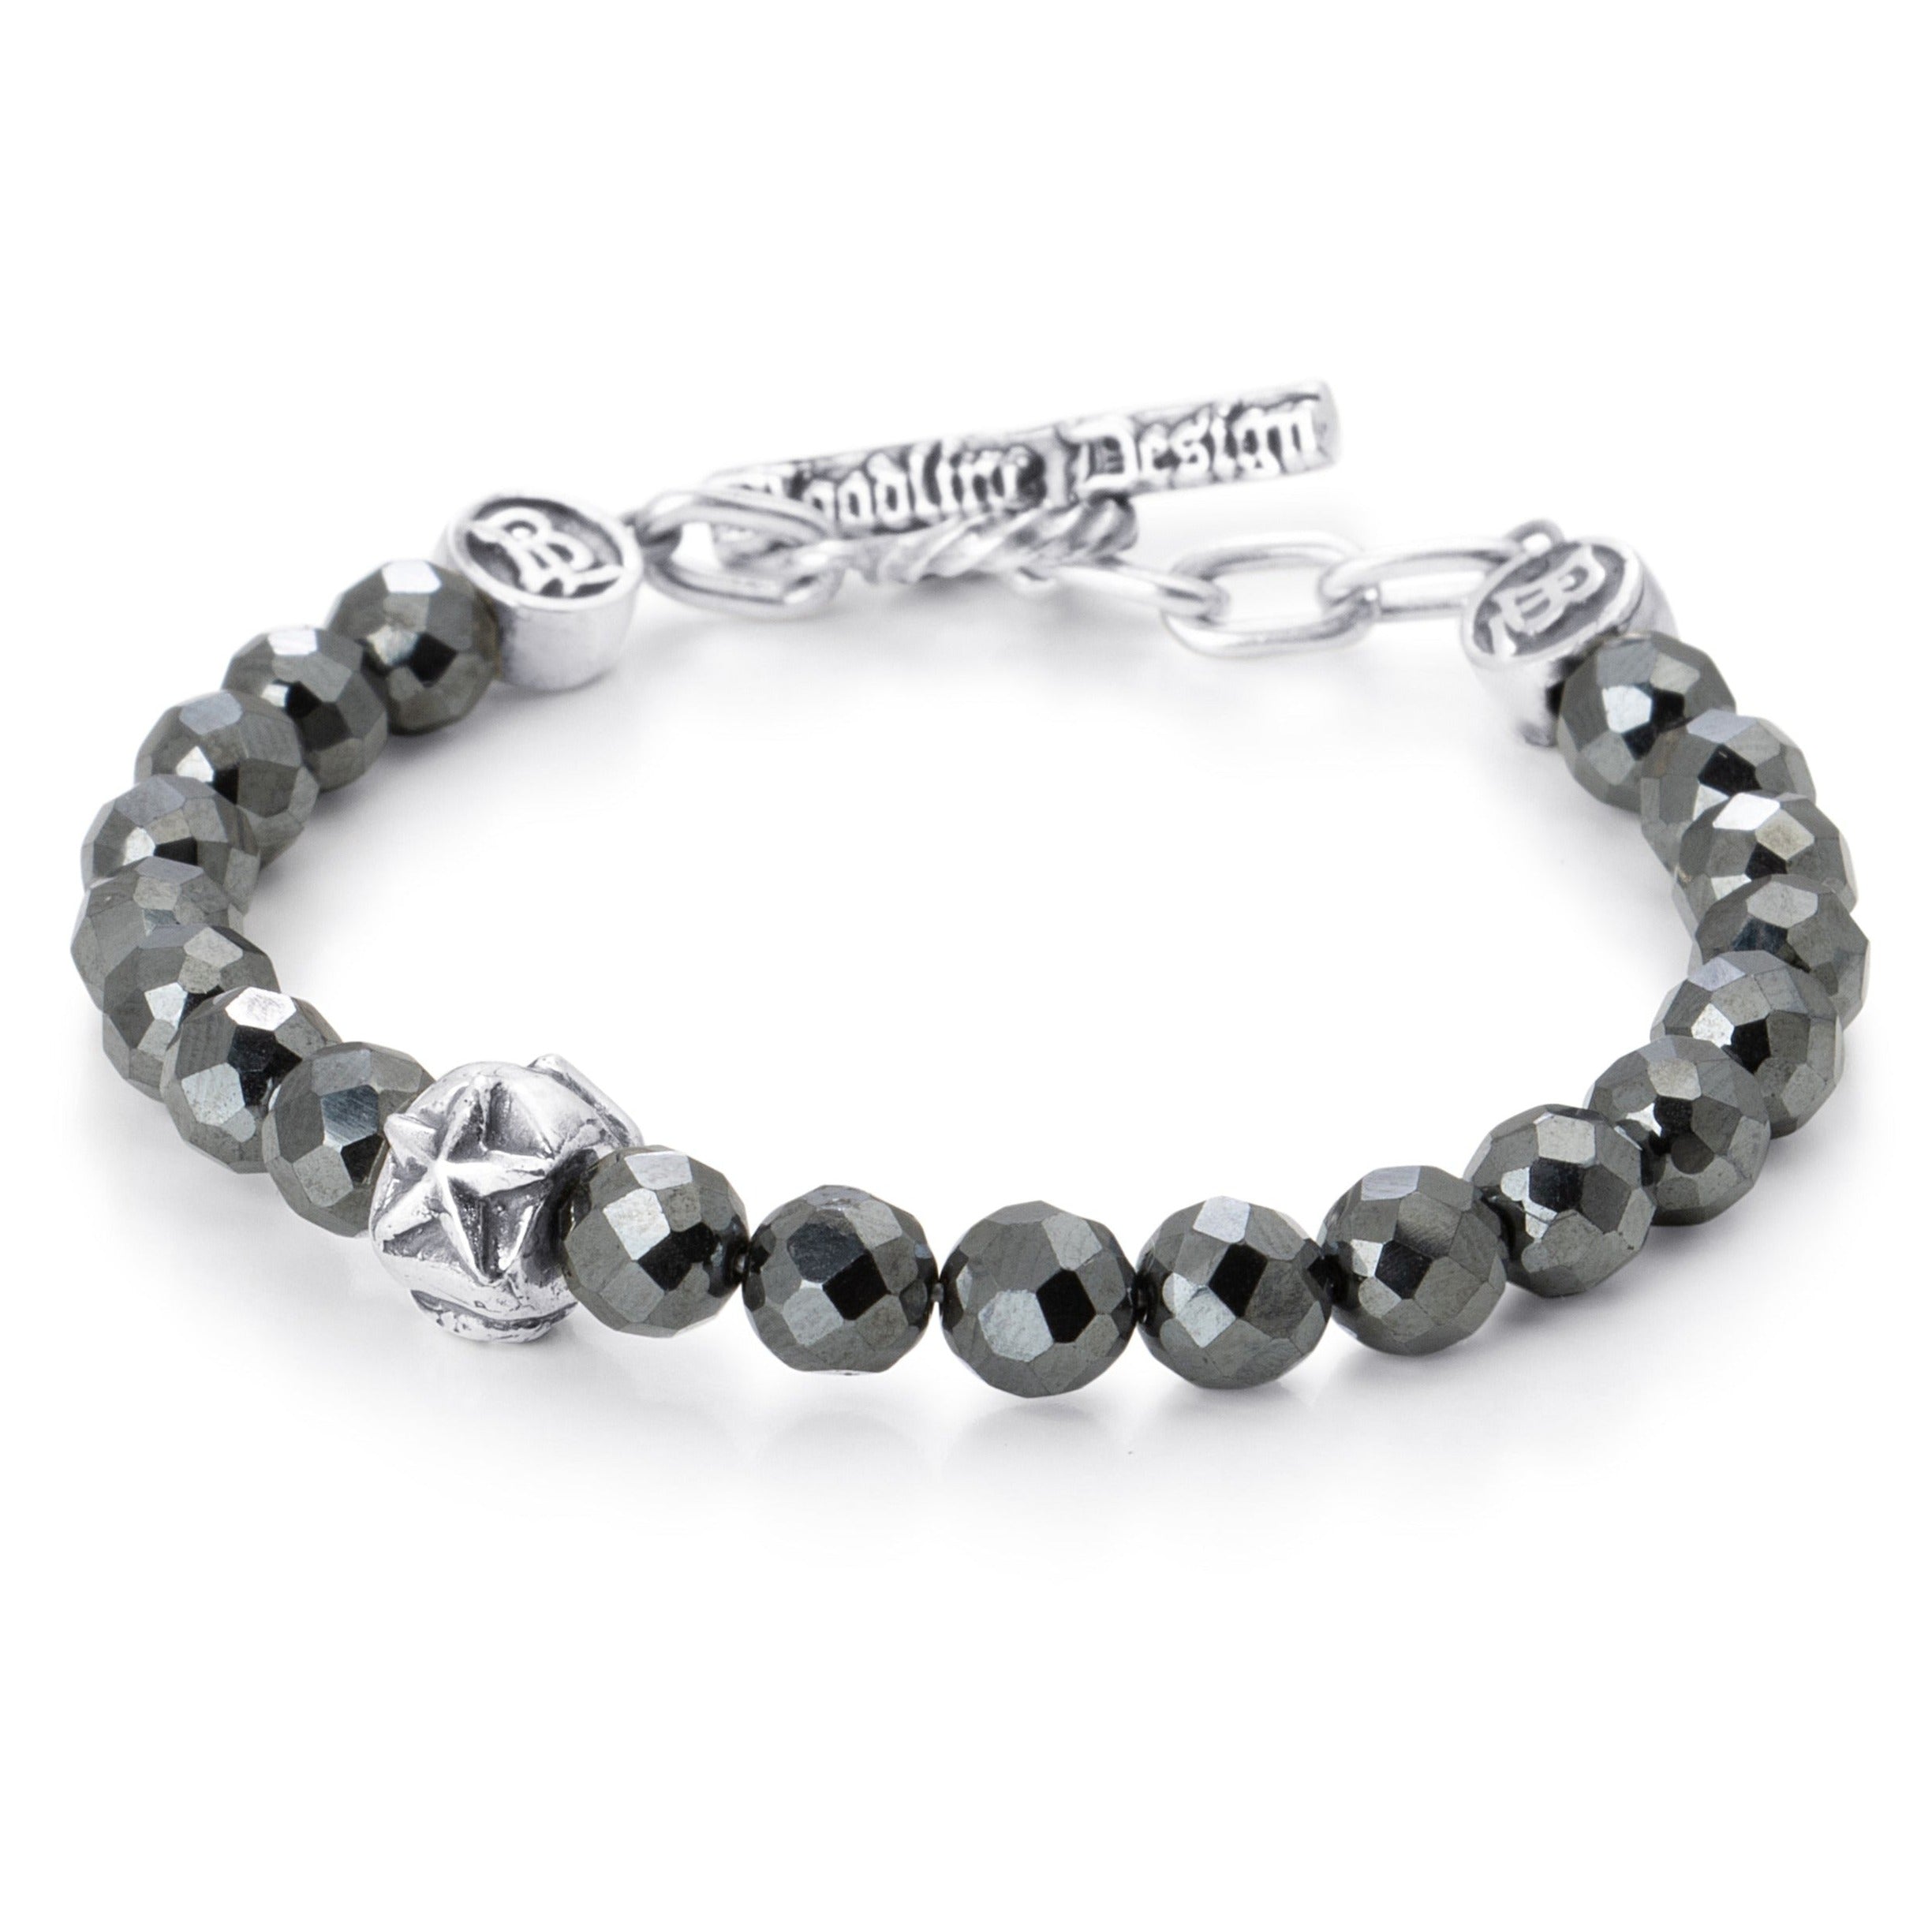 Facetted Hematite beads paired with a single sterling silver bead engraved with a heart star and skull on a stainless steel cable with Sterling silver T clasp.